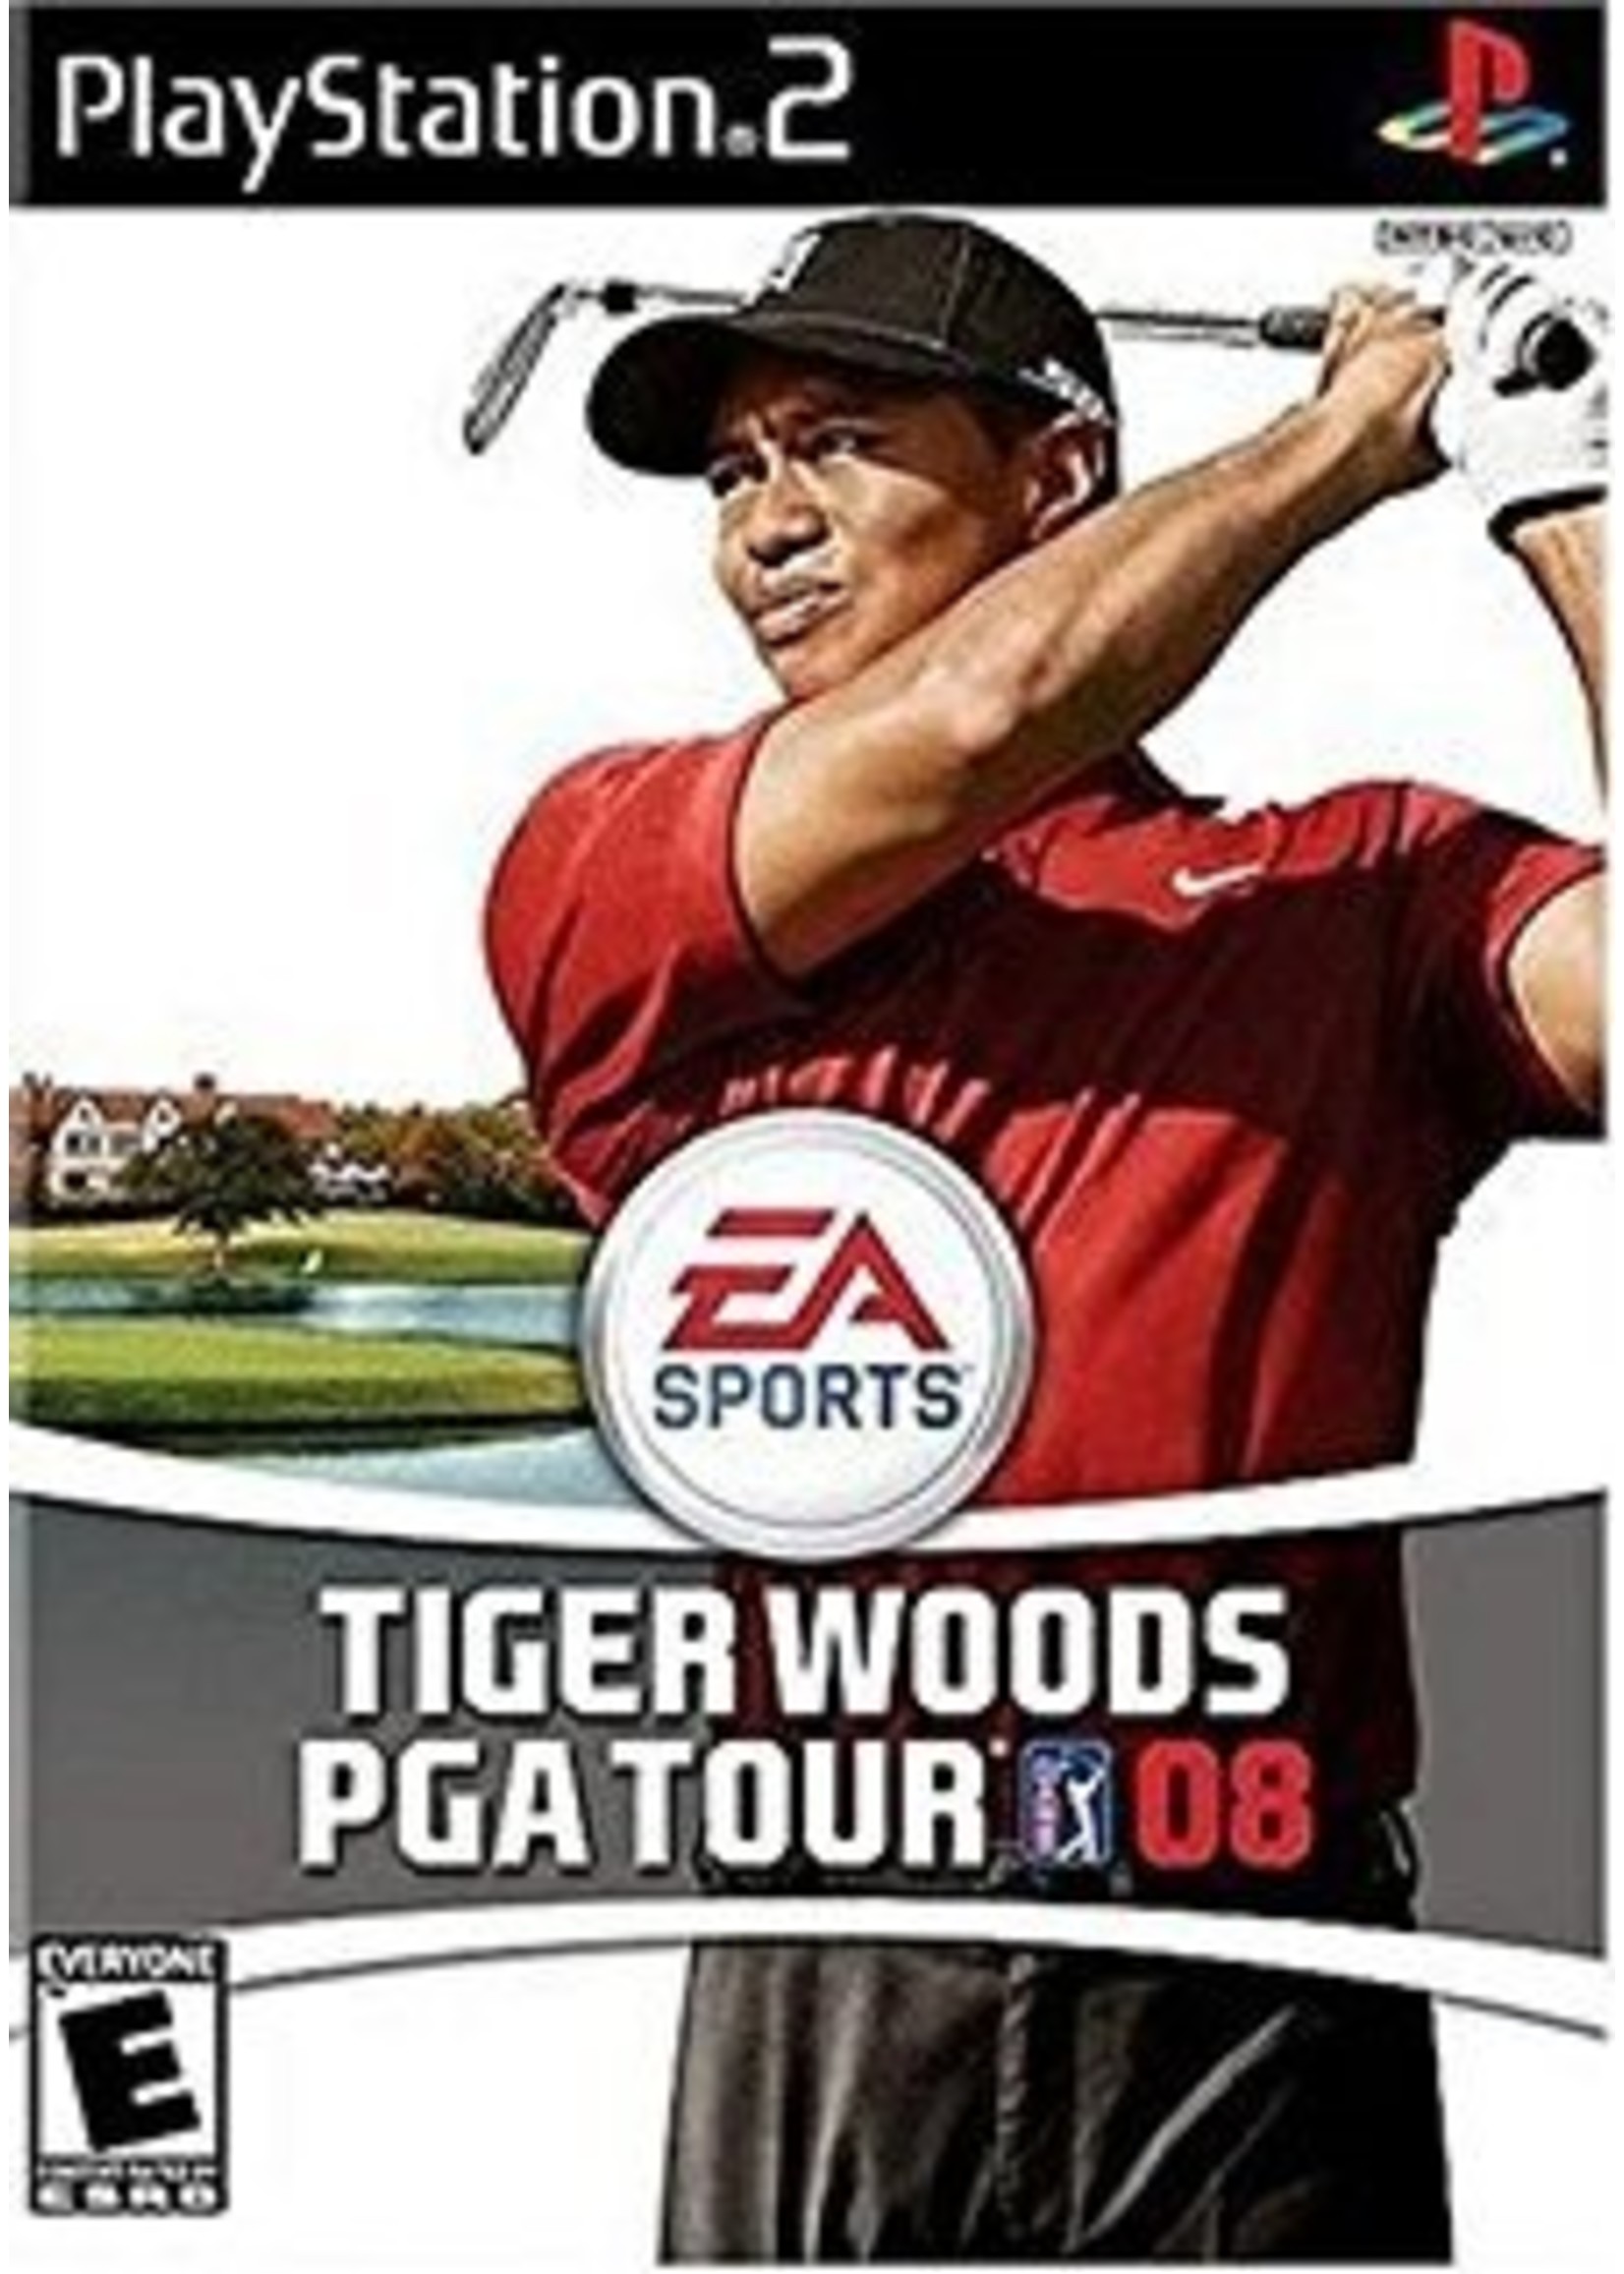 Sony Playstation 2 (PS2) Tiger Woods PGA Tour 2008